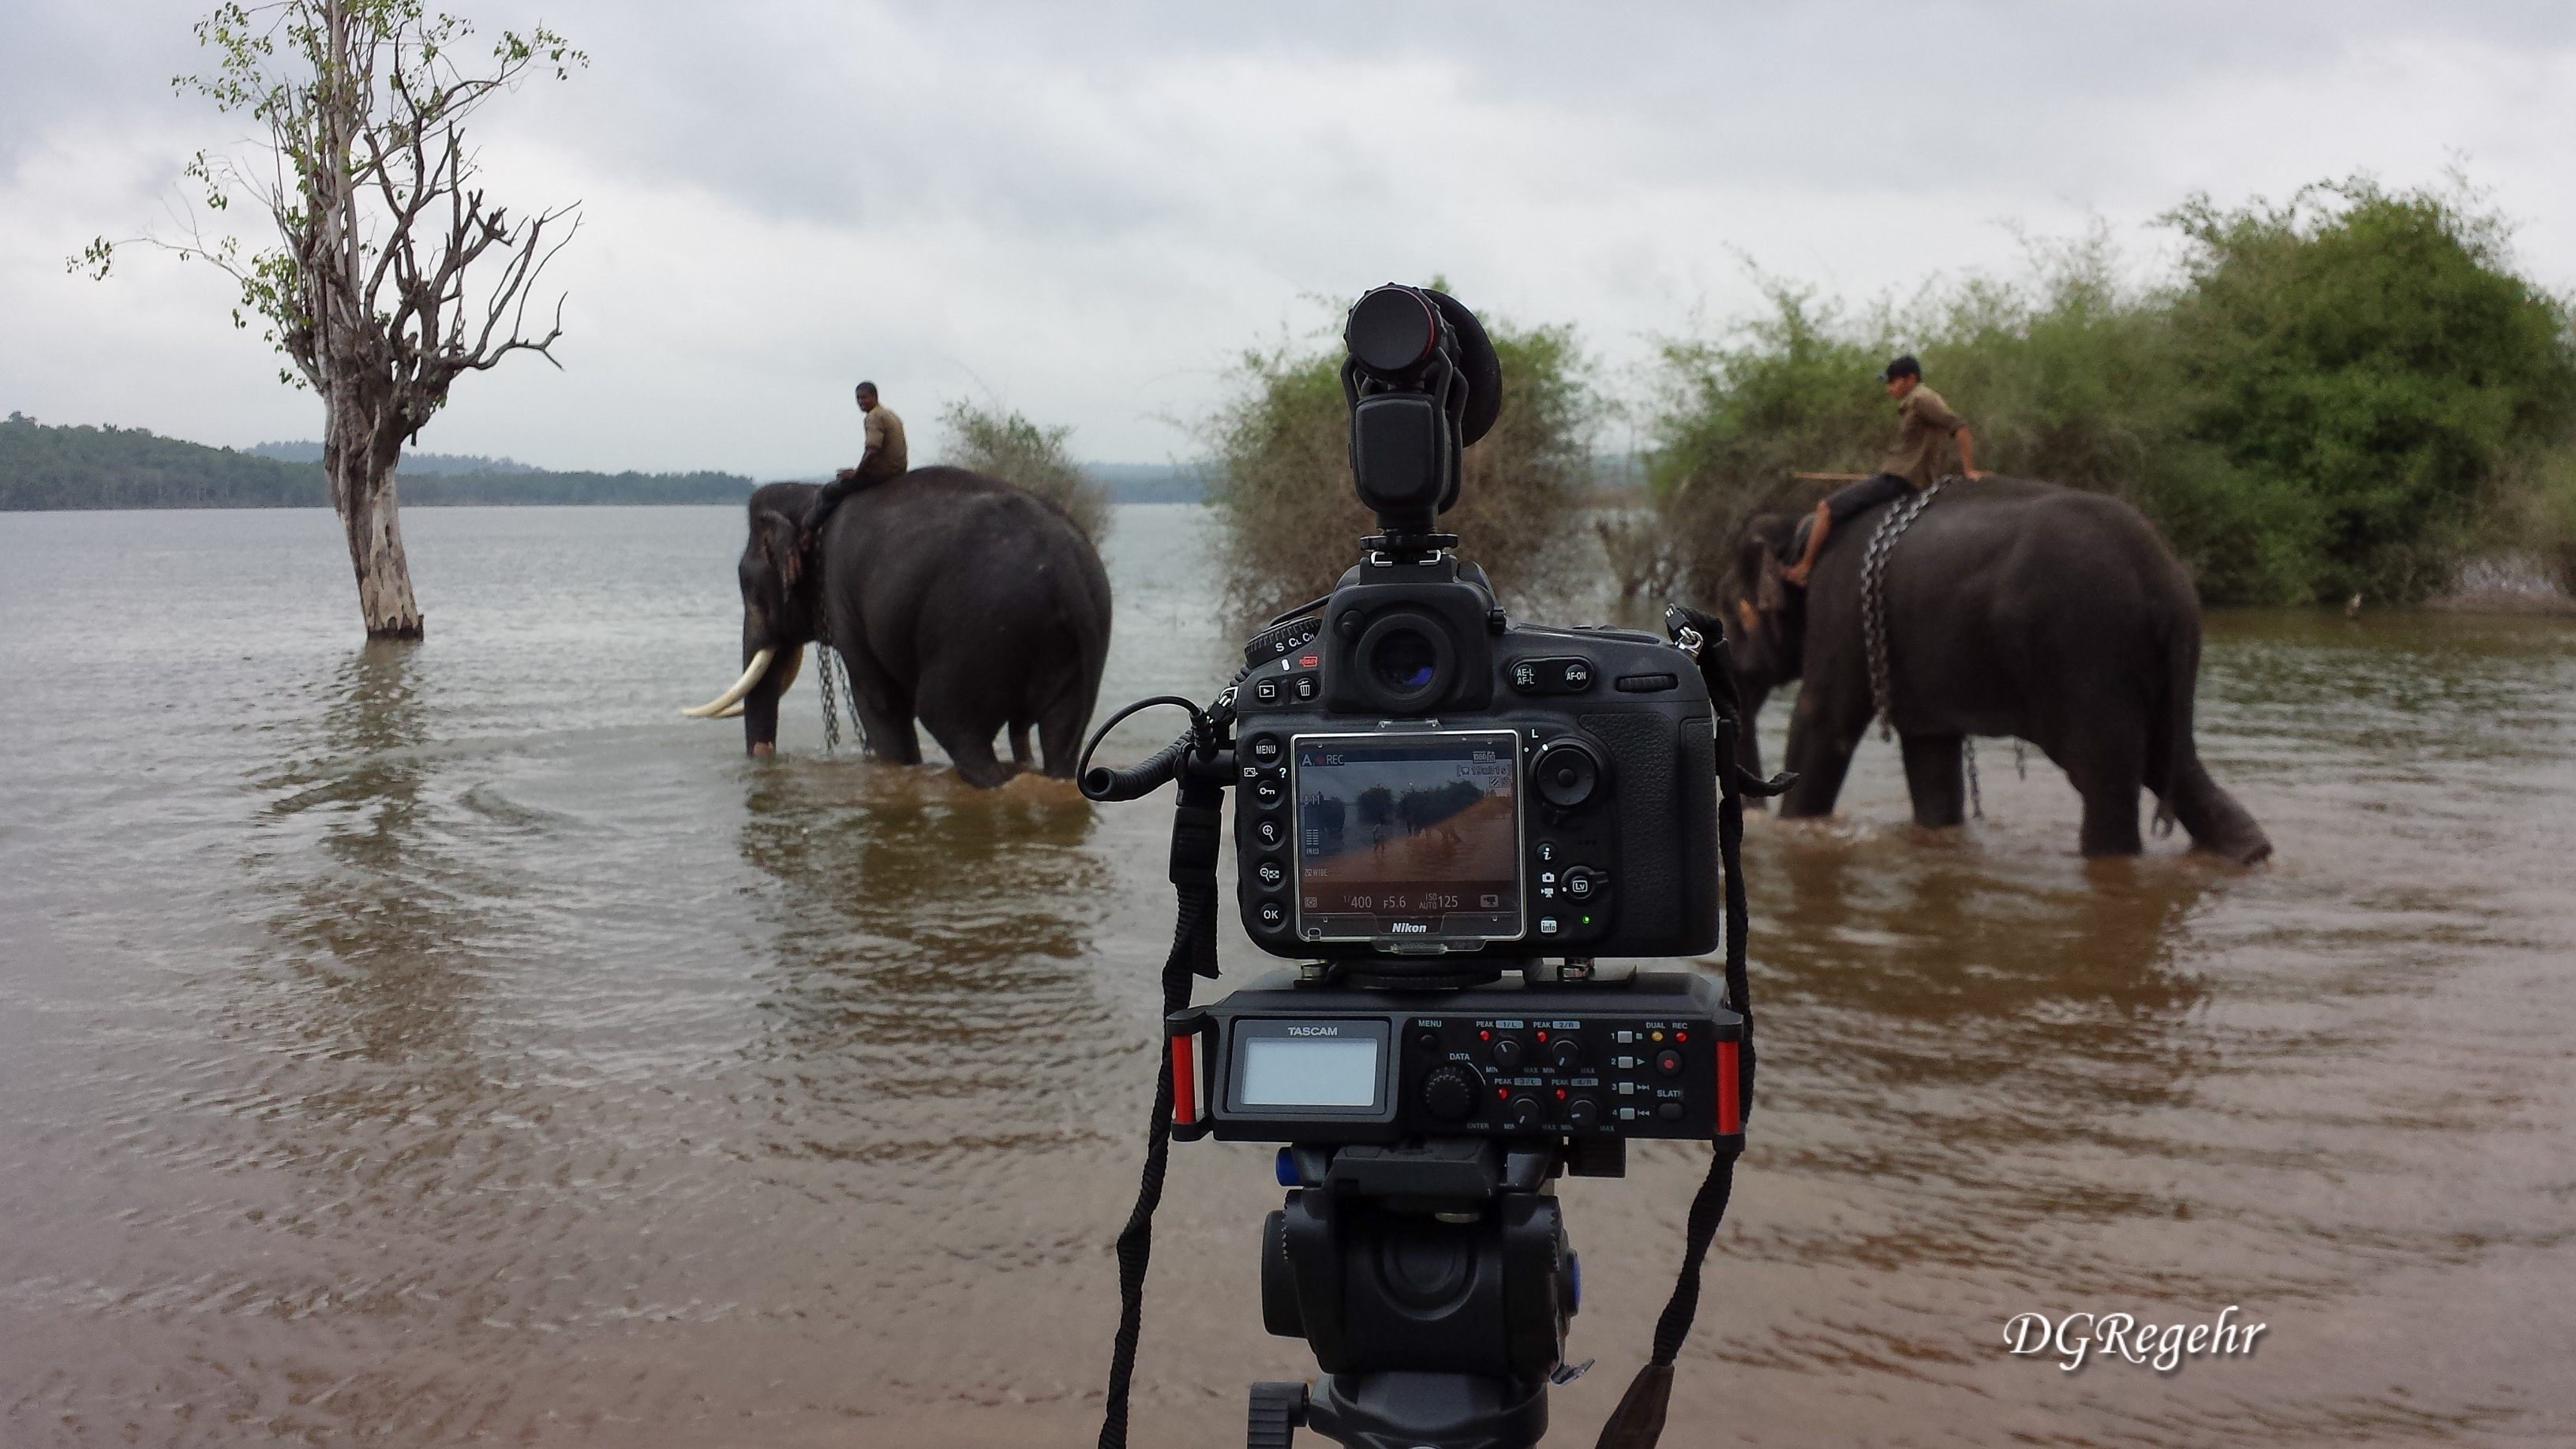 DR-70D with Elephants